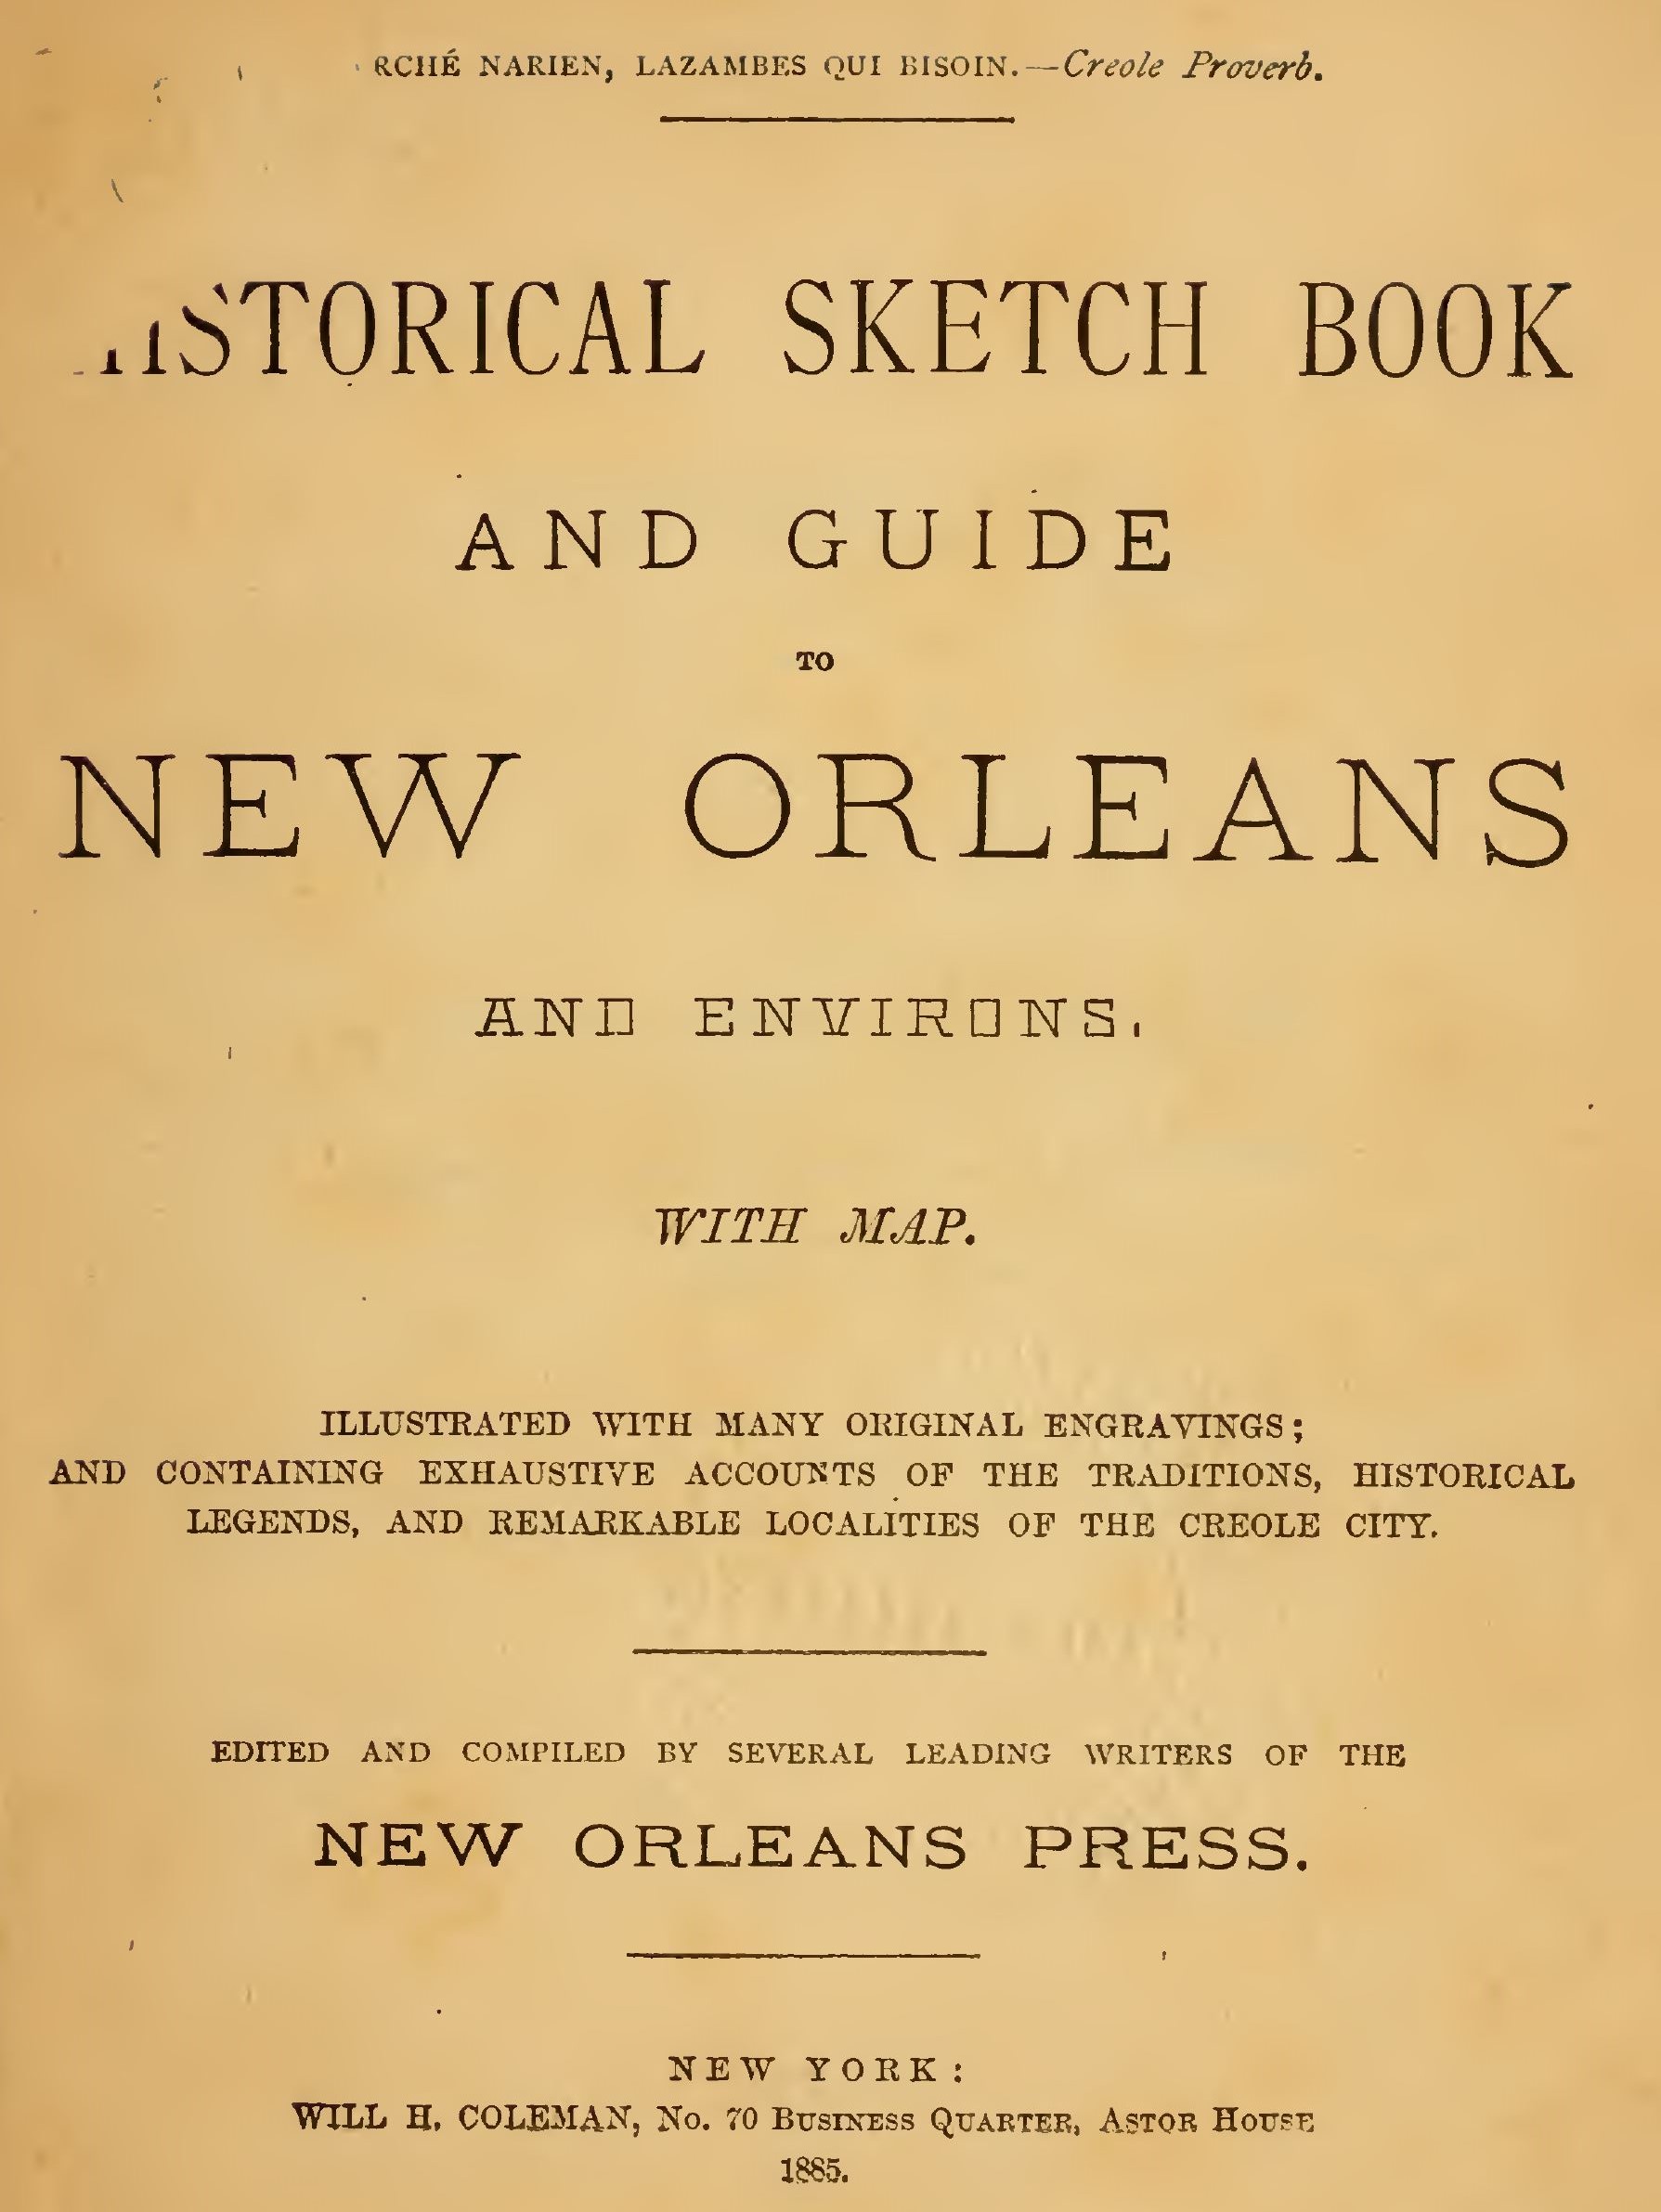 https://louisiana-anthology.org/texts/coleman/images/07--title_page.jpg